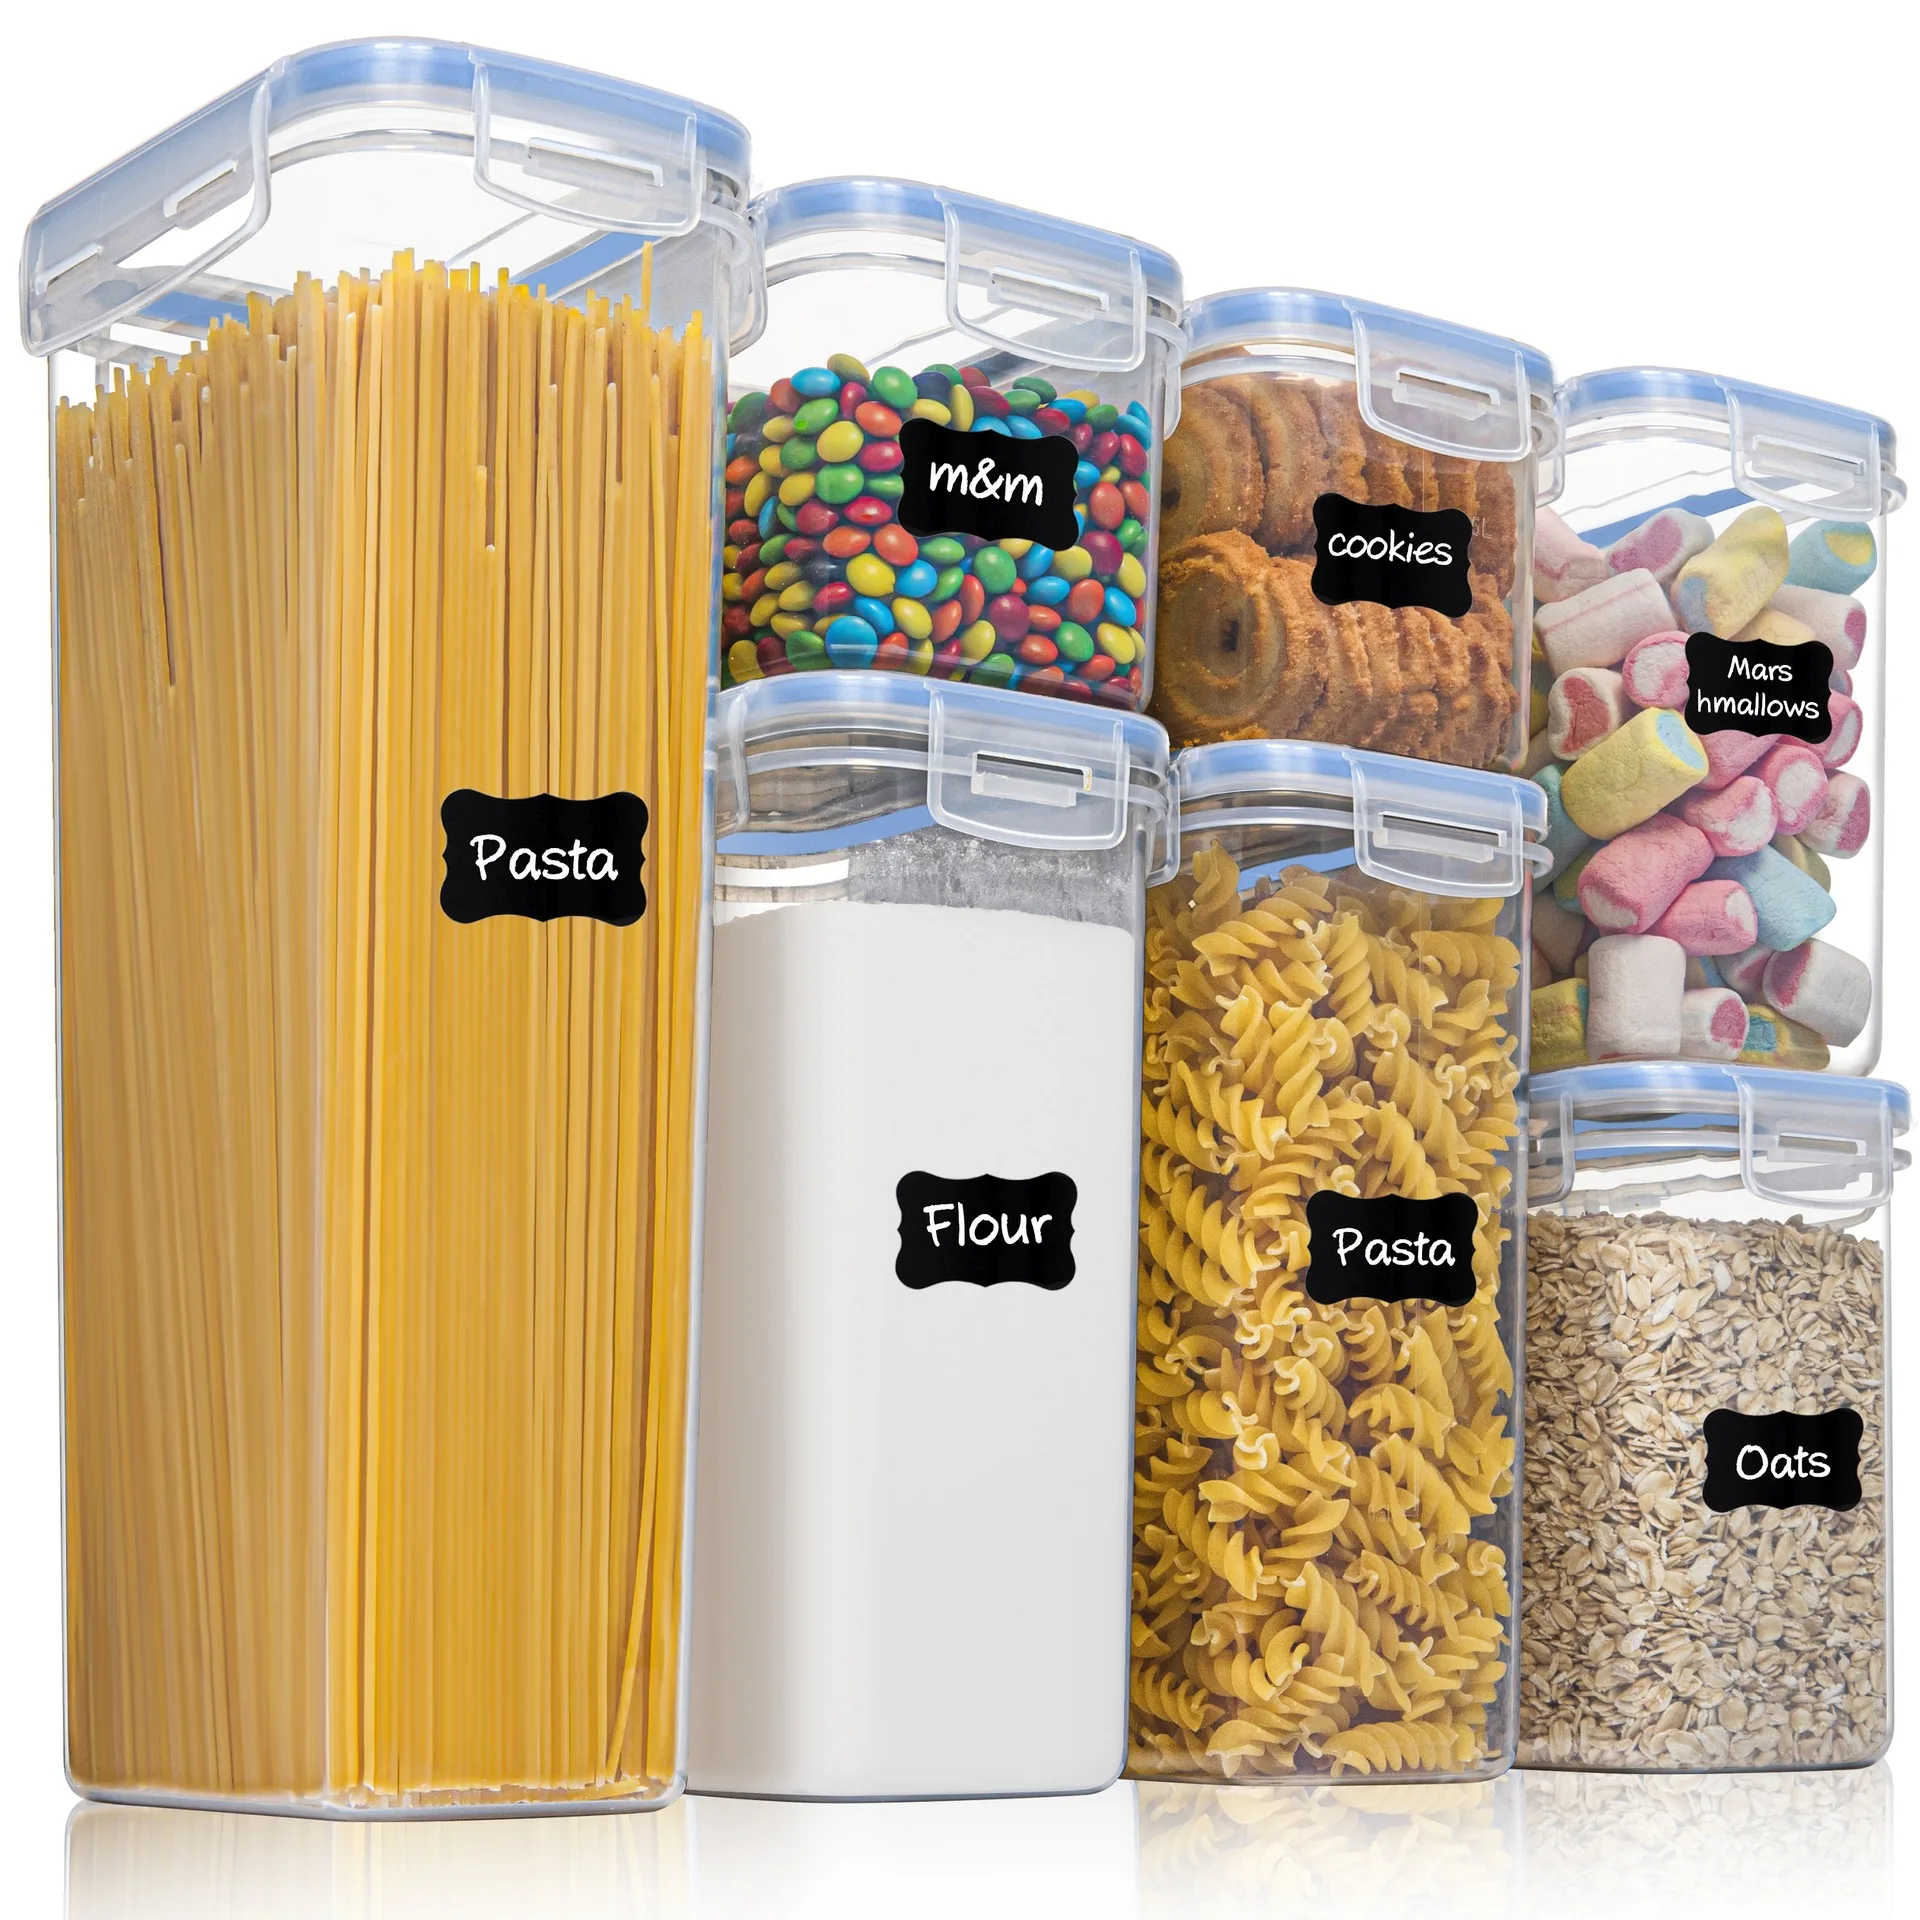 

Set Of 7 Bpa-free Plastic Cereal Container Dispenser Airtight Watertight Cereal Keeper Dry Food Storage Containers